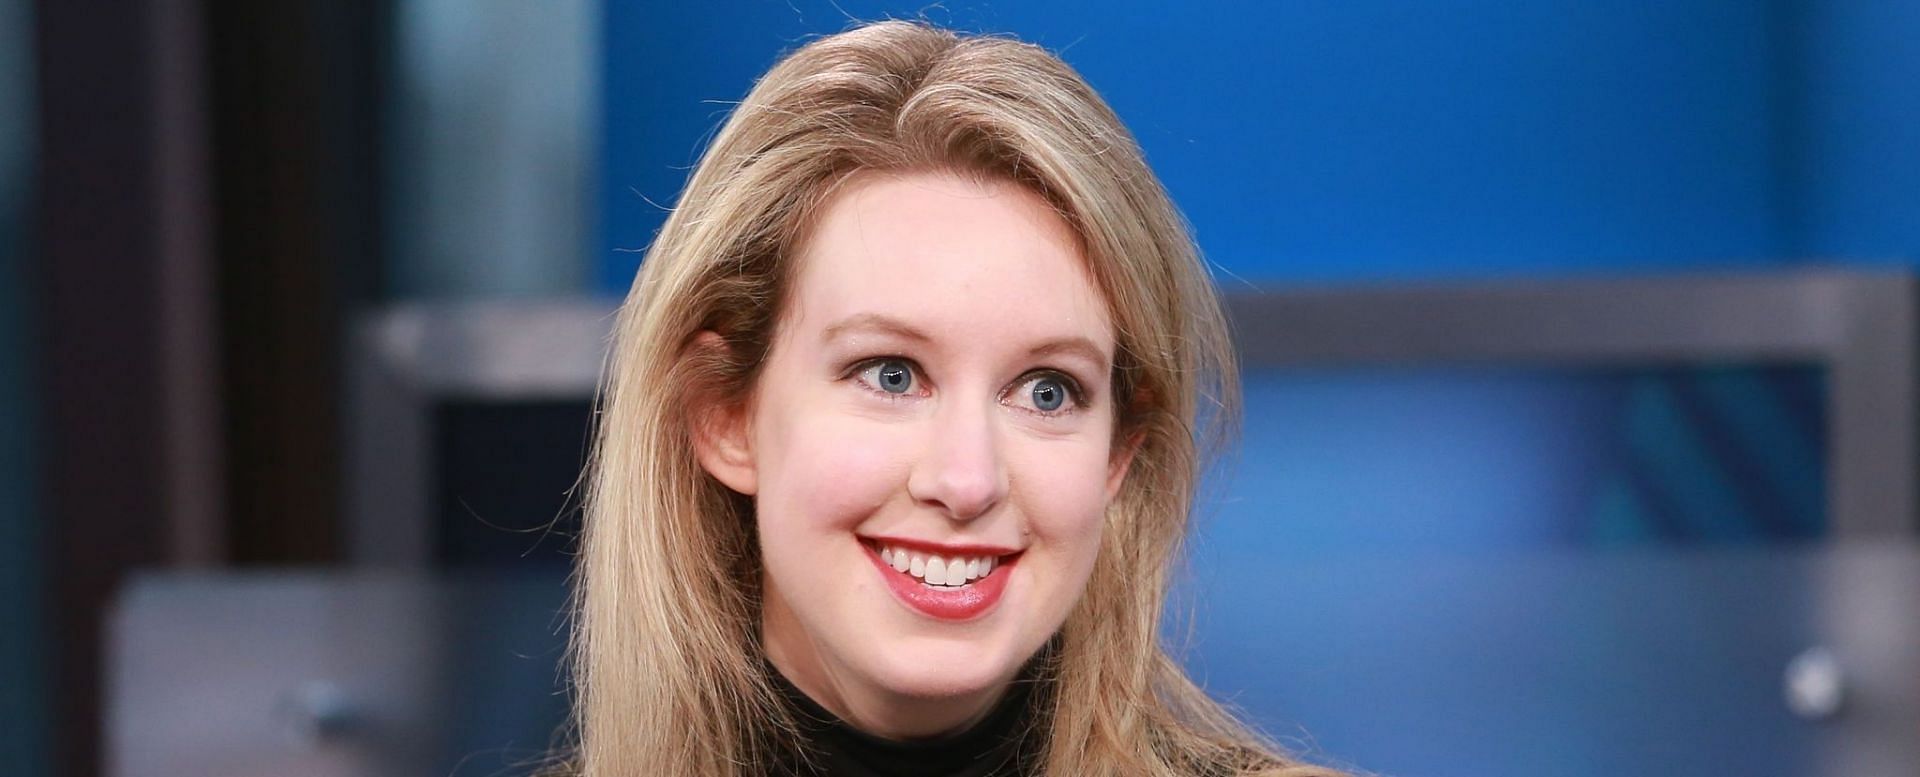 Former Theranos CEO Elizabeth Holmes has been found guilty of four fraud-related charges (Image via David Orrell/Getty Images)